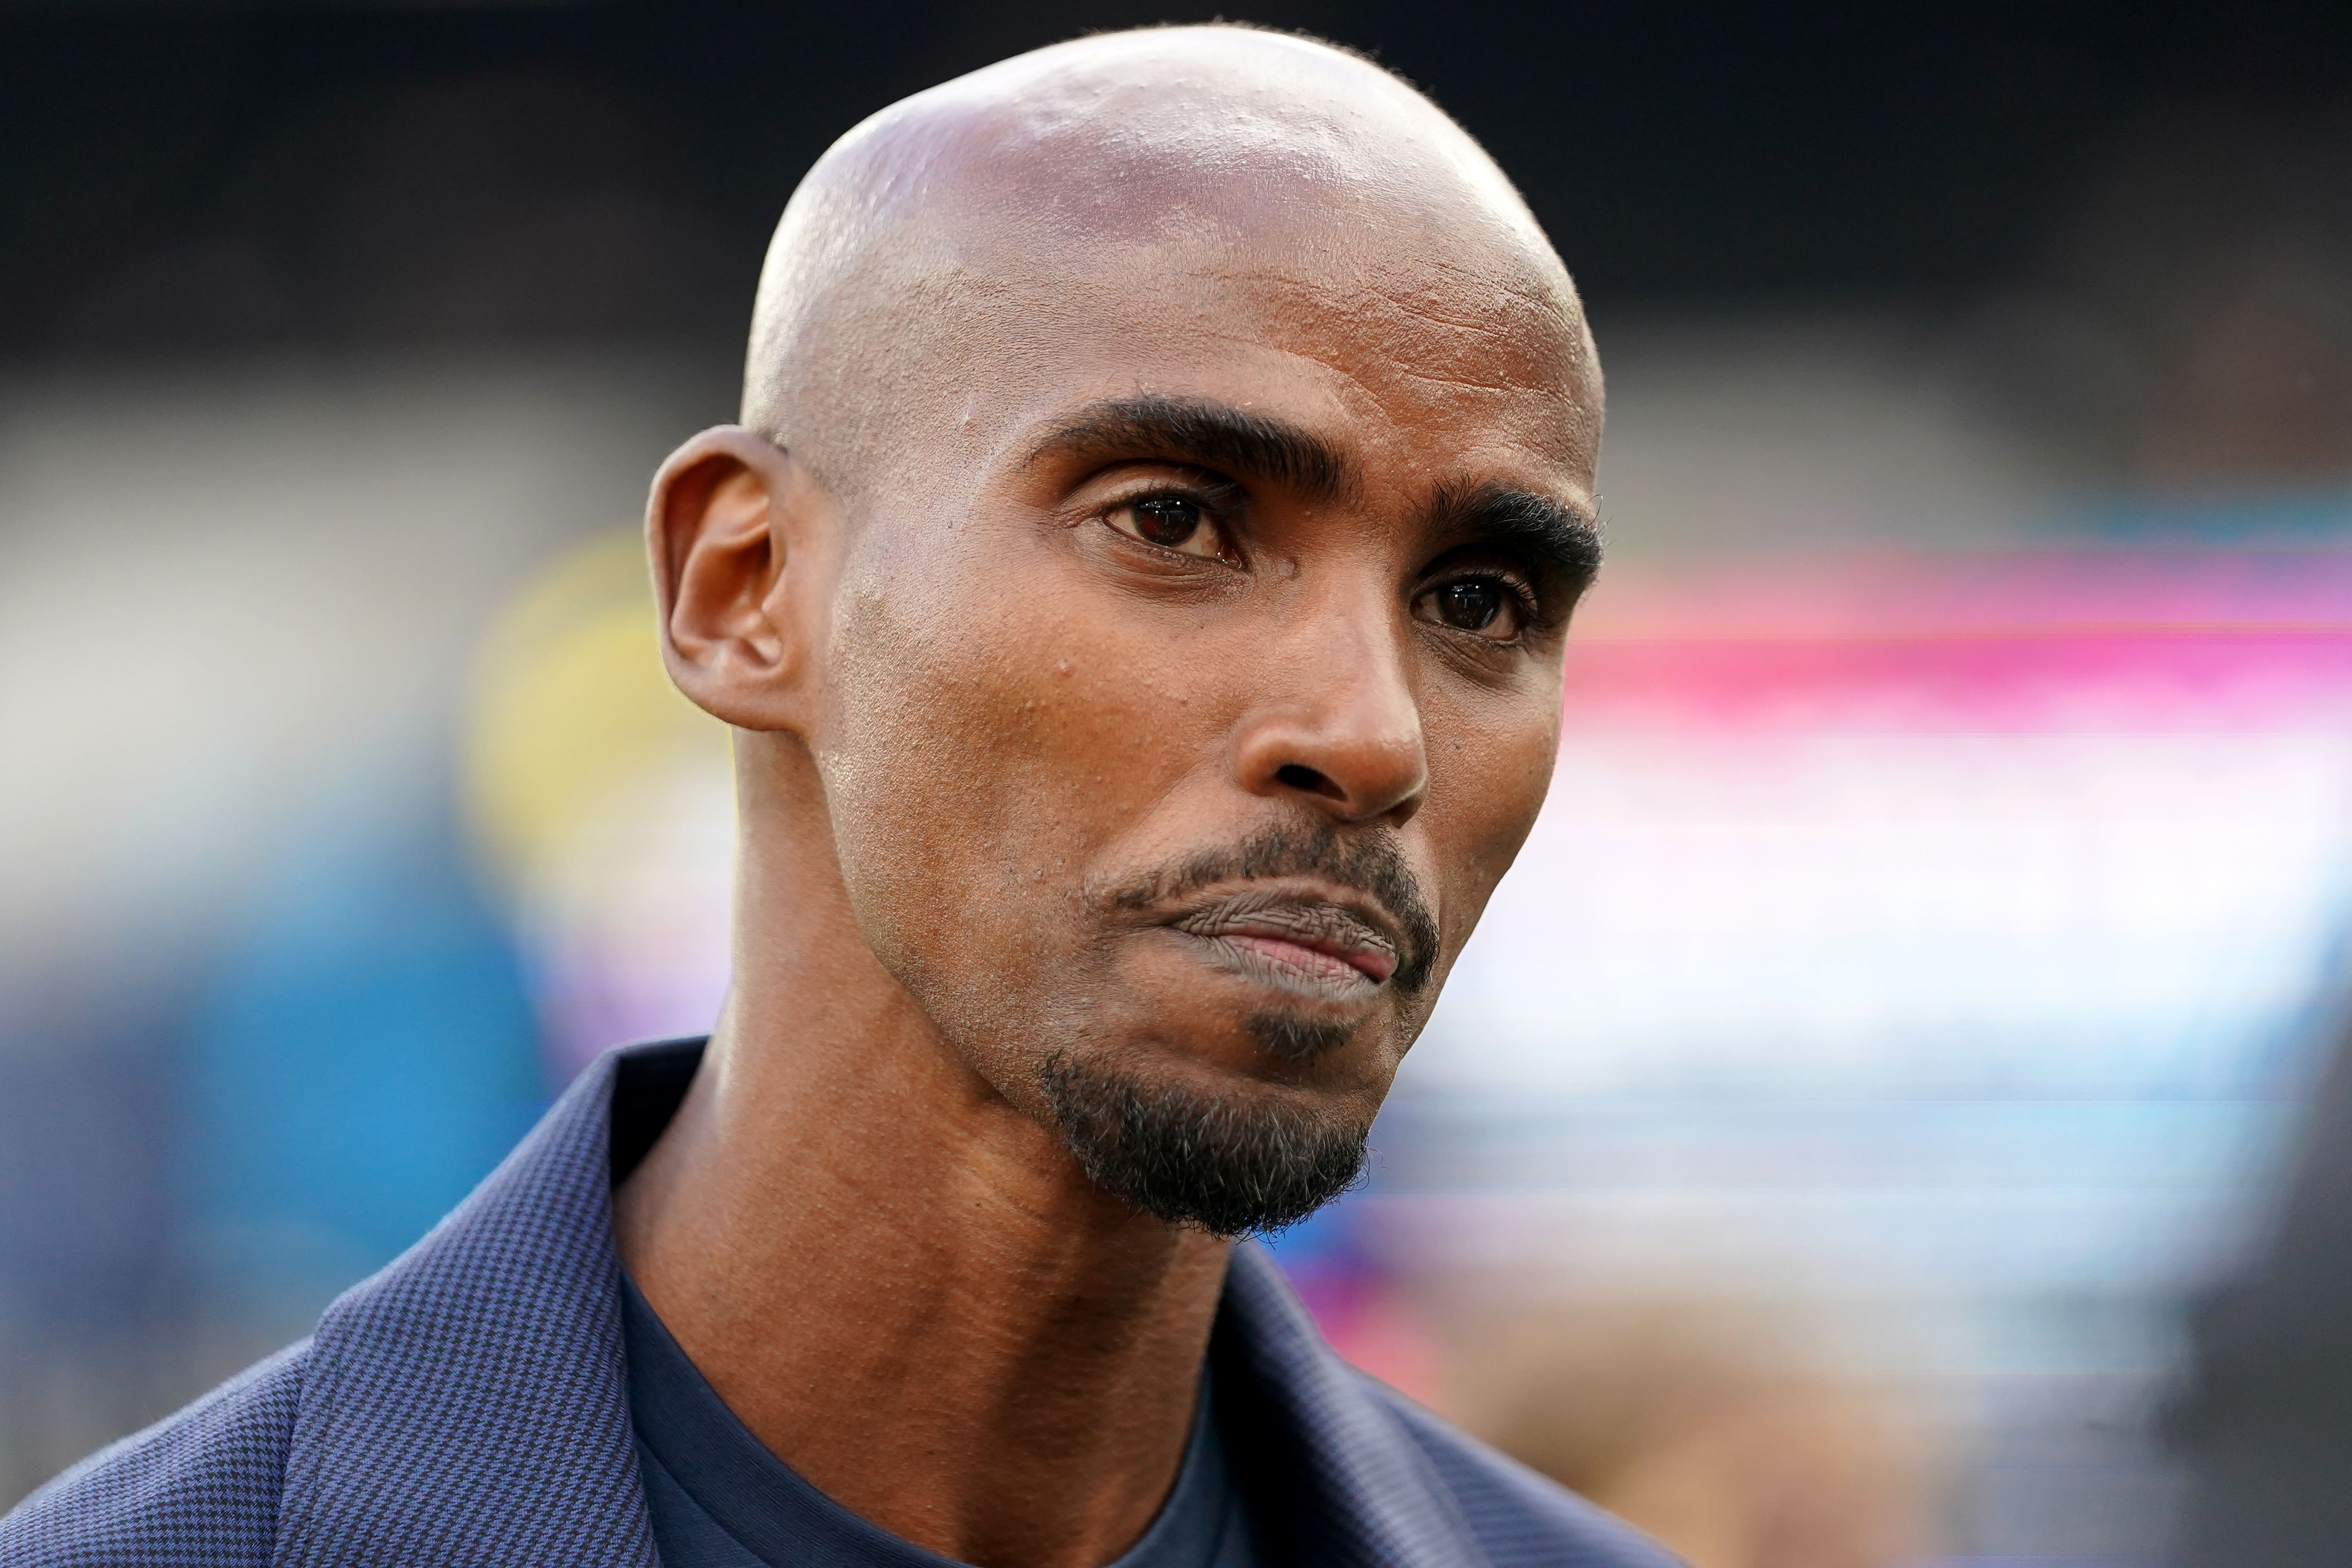 Sir Mo Farah has campaigned against campaigning against human trafficking and modern slavery (Zac Goodwin/PA)